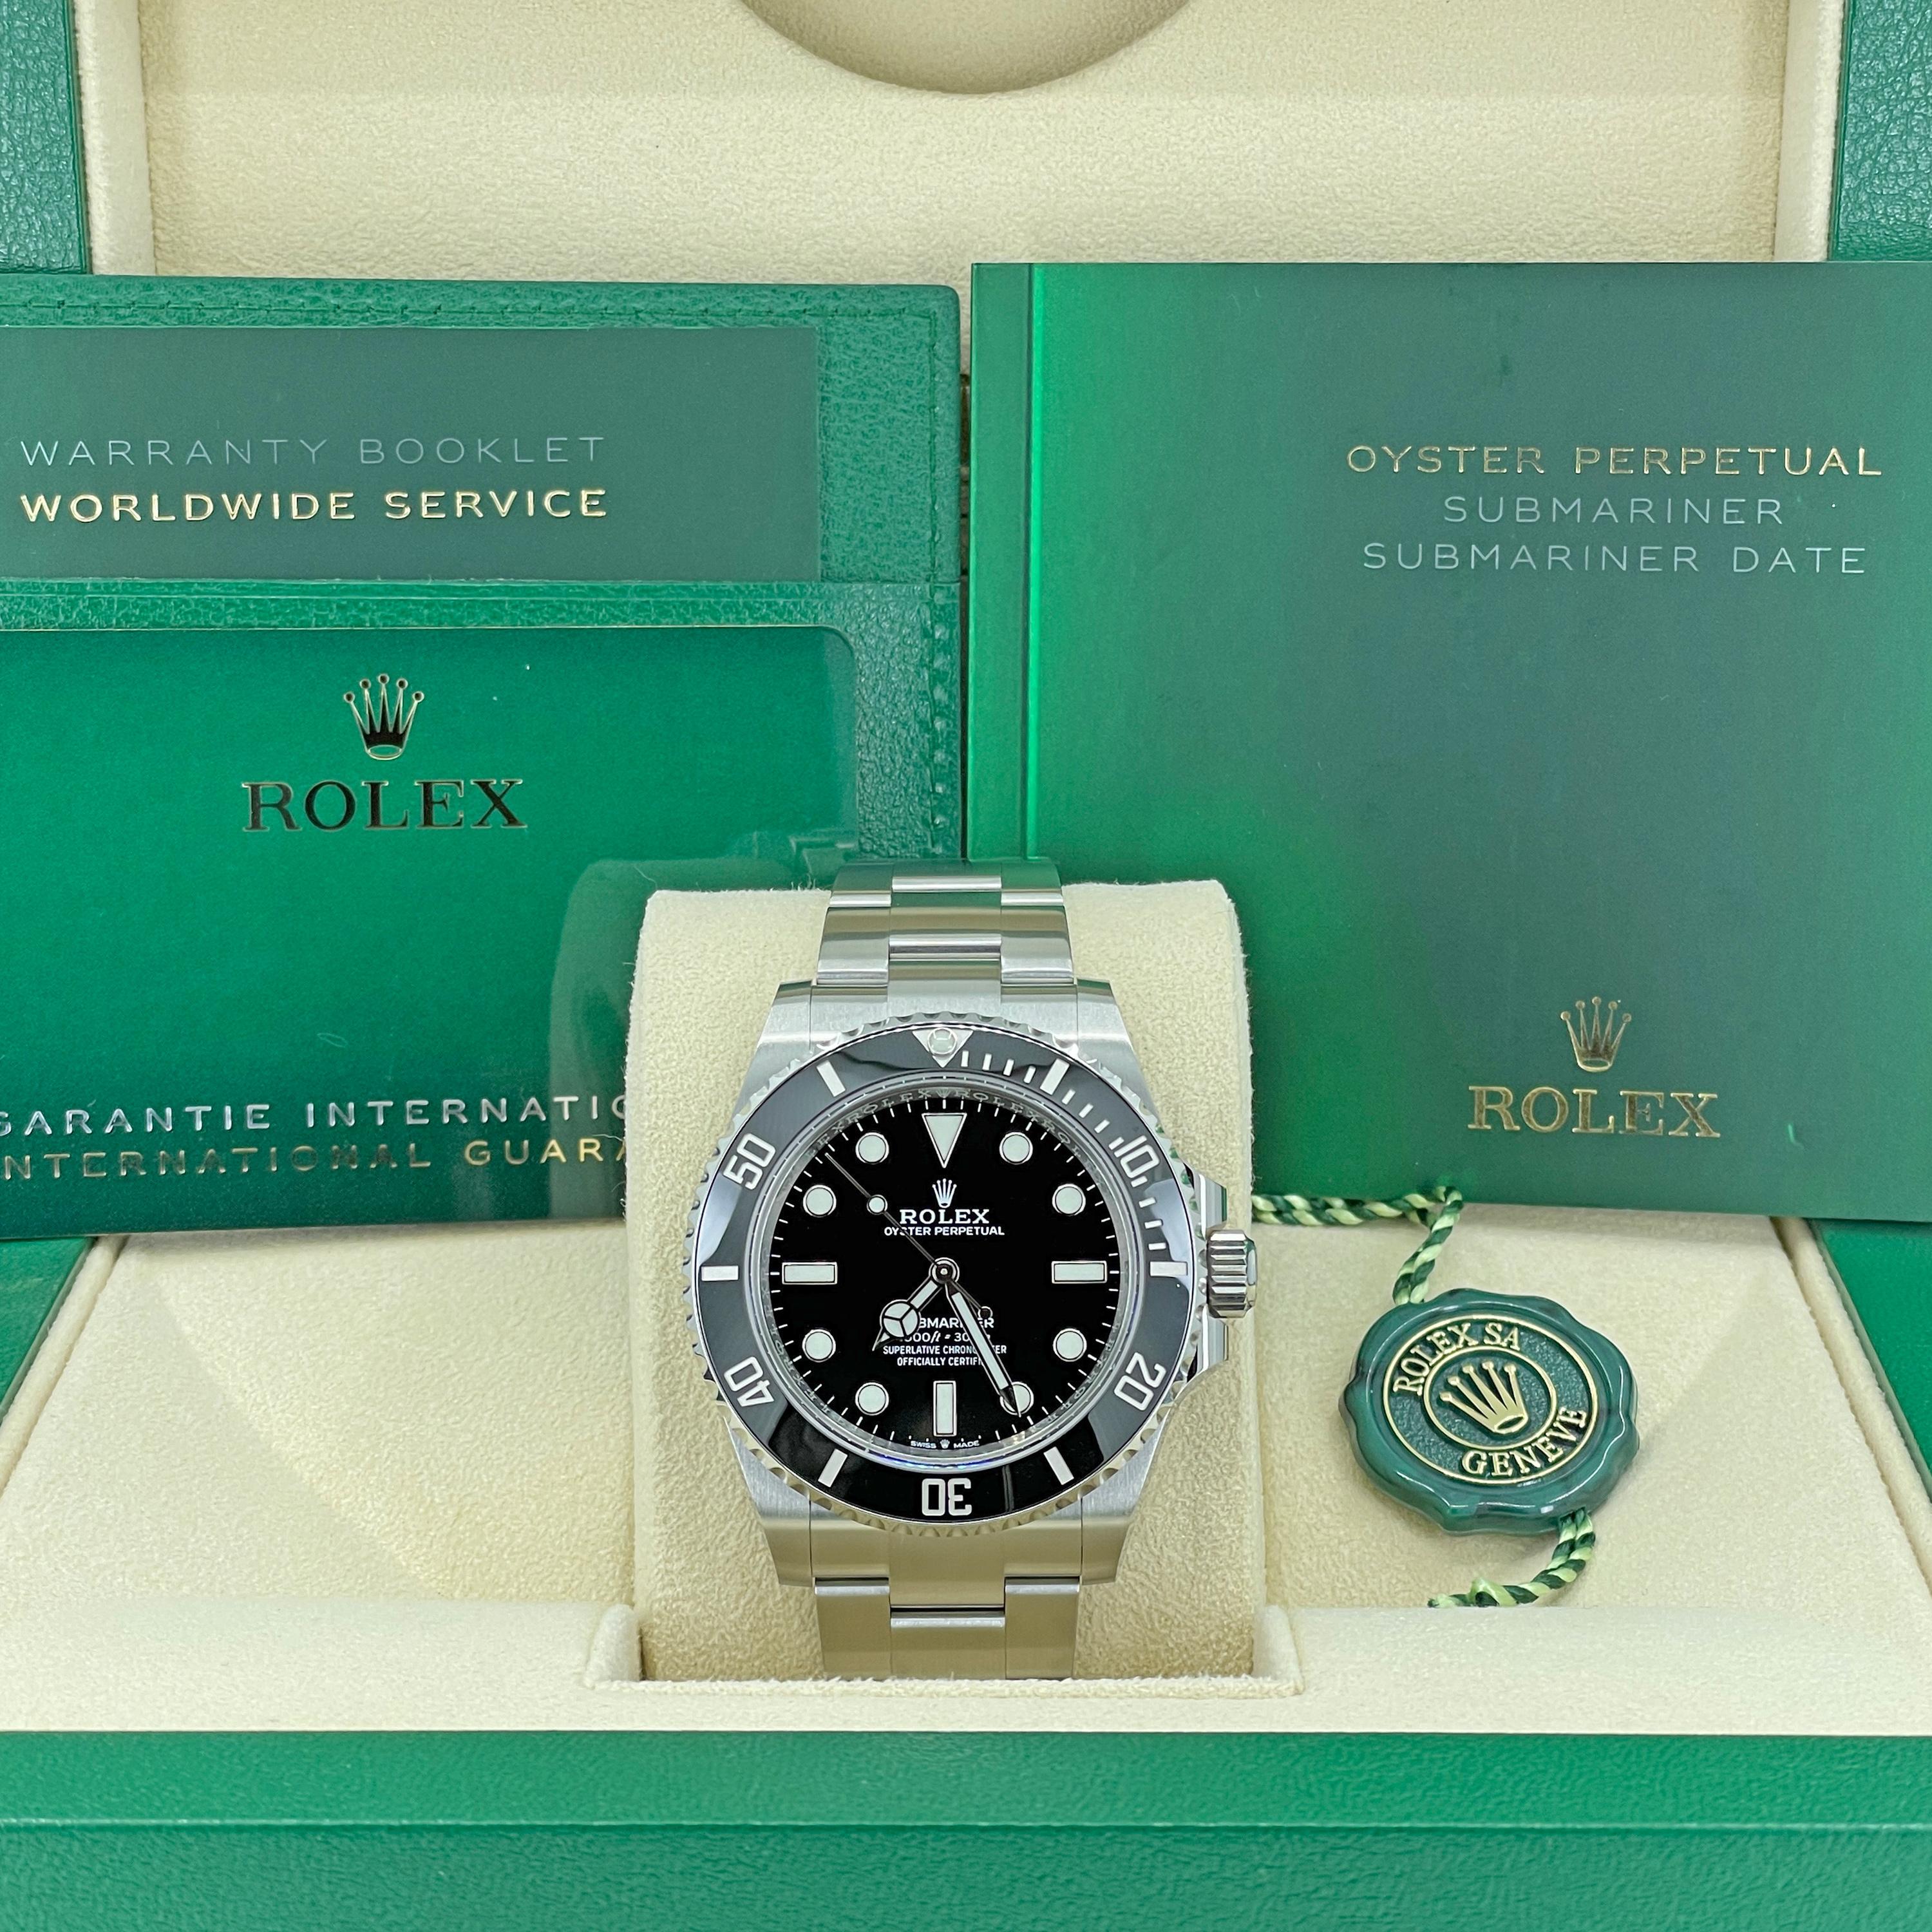 The watch is Unworn and Complete with the original Rolex Box and Rolex Warranty card dated 2022.

41 mm Stainless Steel Rolex Oyster Perpetual Submariner with Black Dial and Black Ceramic Insert Uni-directional Rotating Bezel. The watch case is made